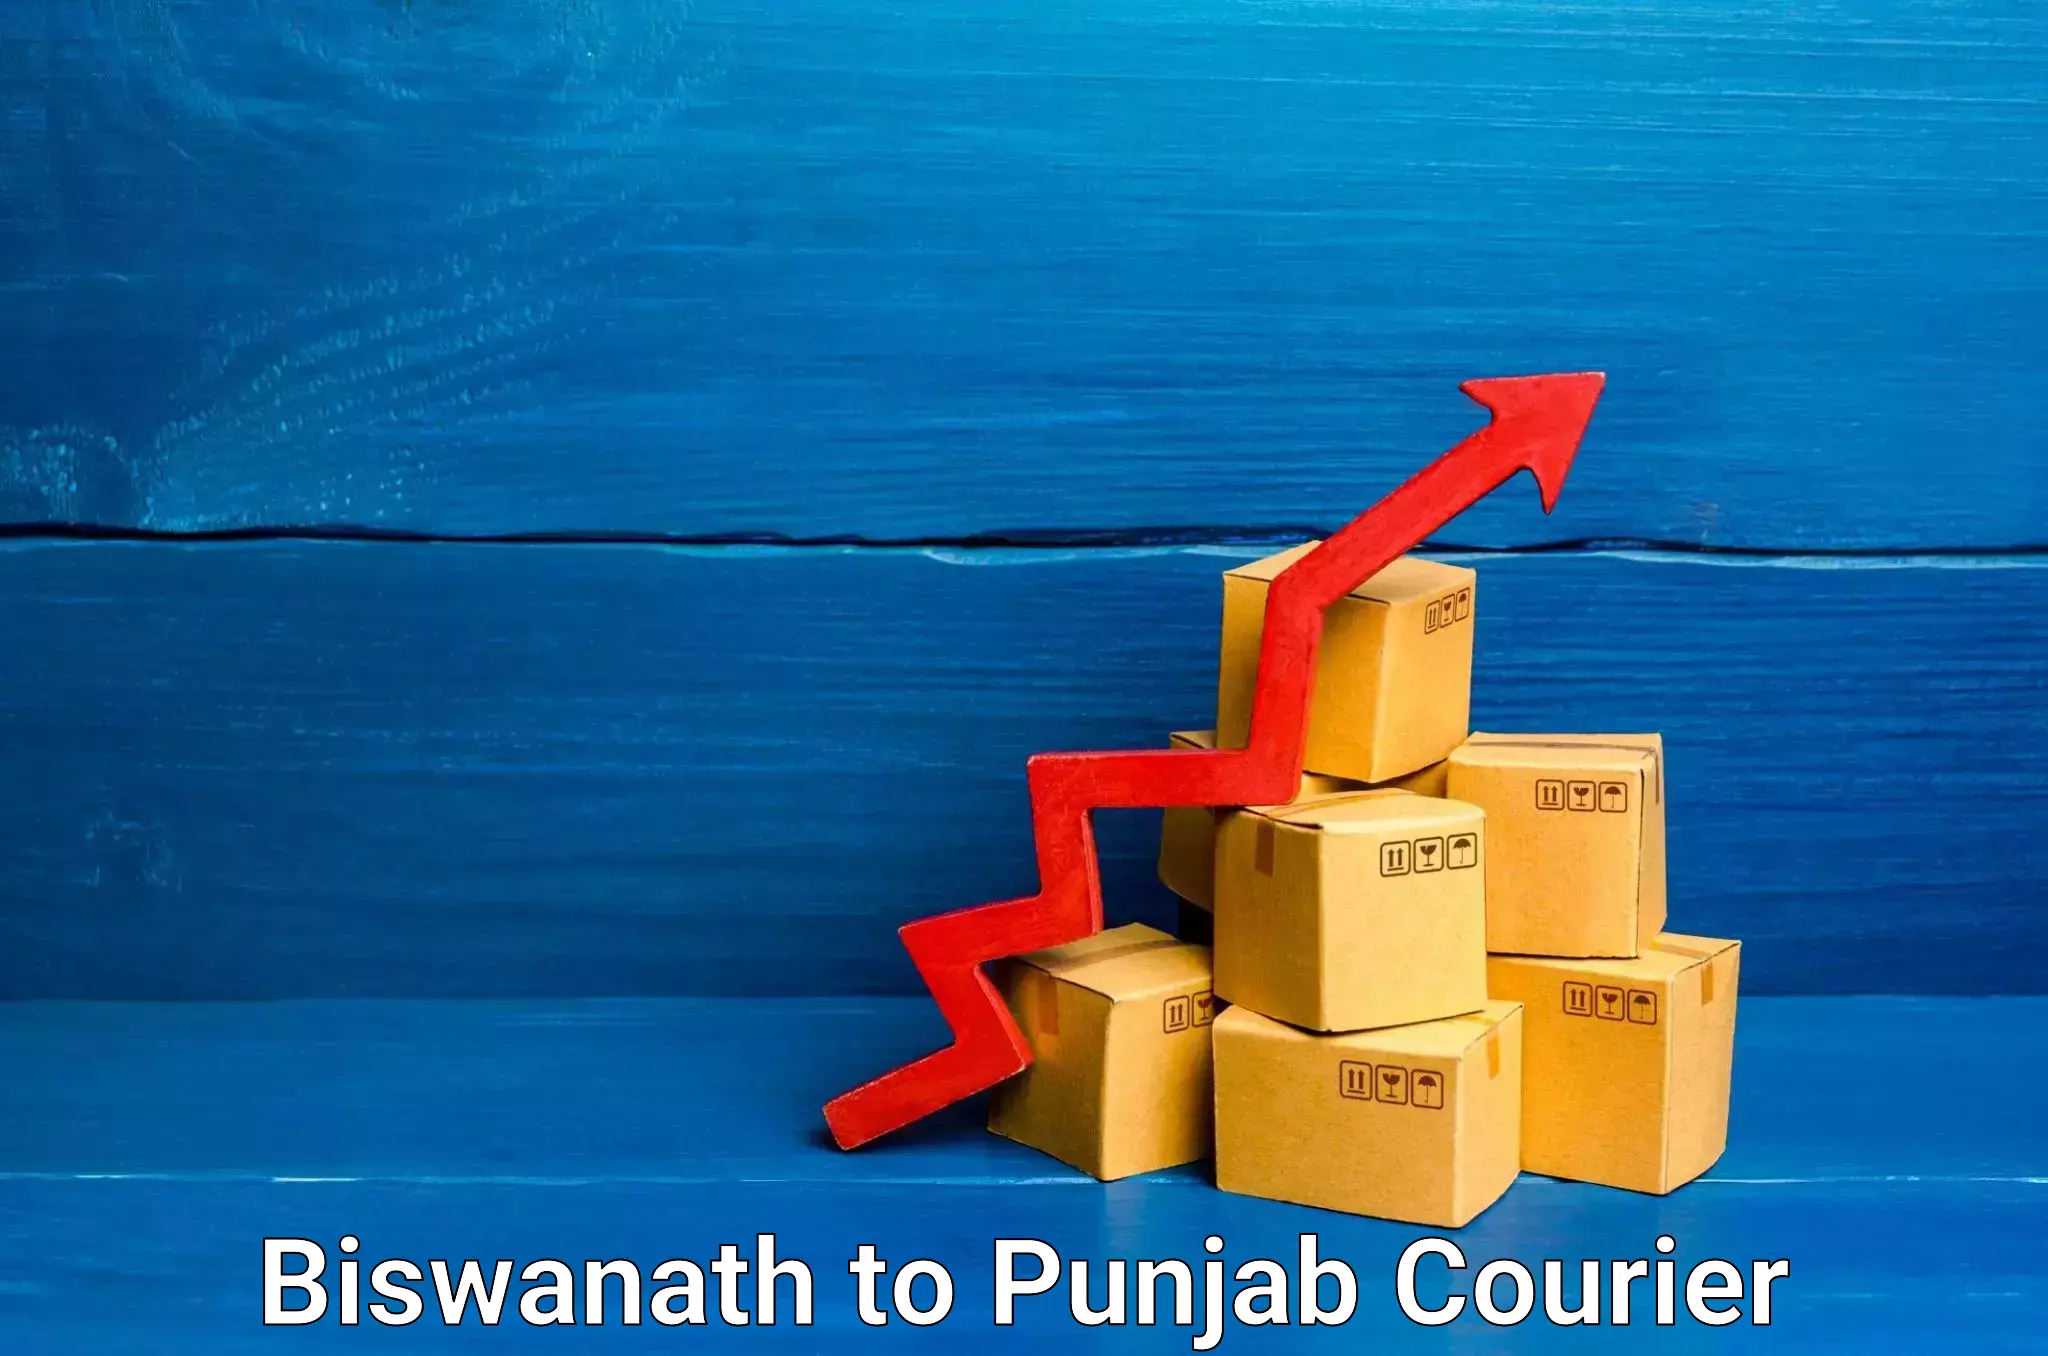 Courier service innovation in Biswanath to Bagha Purana